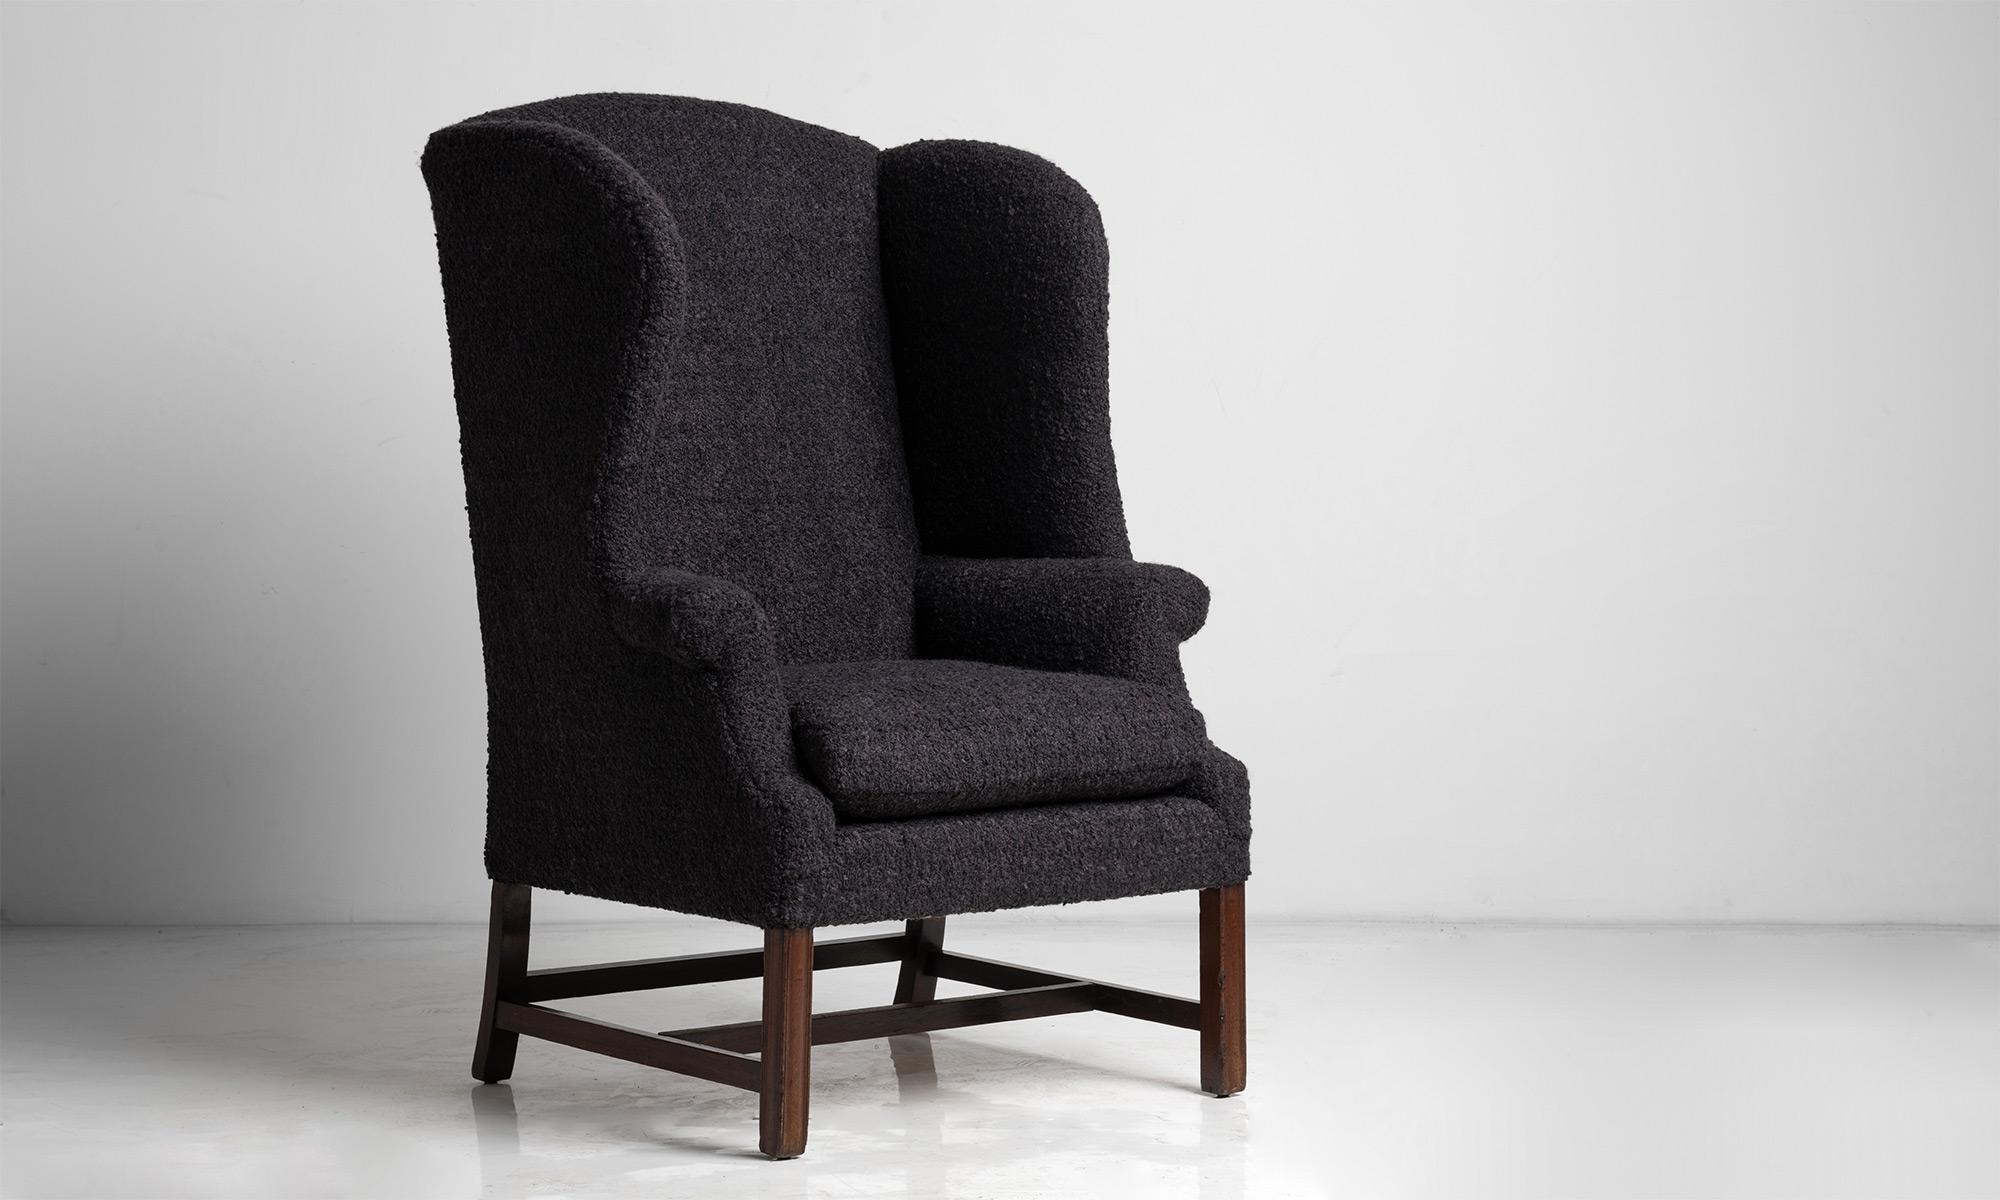 Monumental Wing Chair in Boucle Fabric from Rosemary Hallgarten

England circa 1860

Newly upholstered Chair in Rosemary Hallgarten fabric.

32.5”L x 27”D x 50.5”H x 21”seat